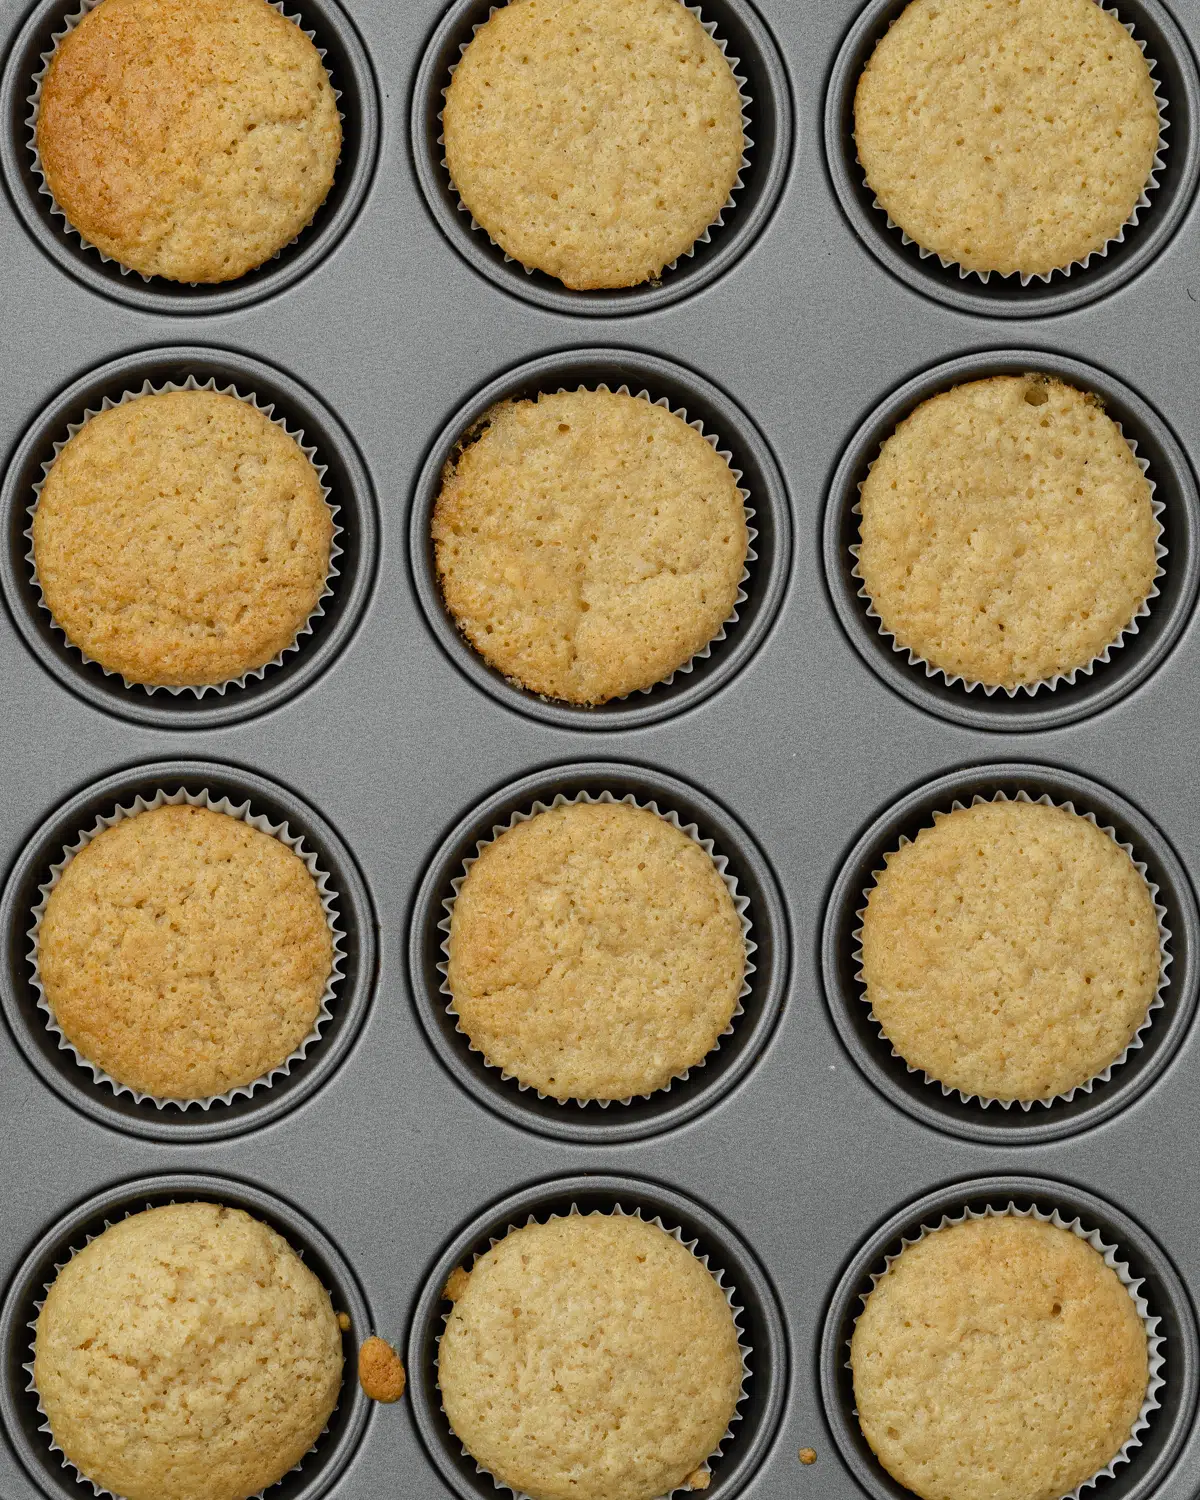 baked cupcakes in a tray.